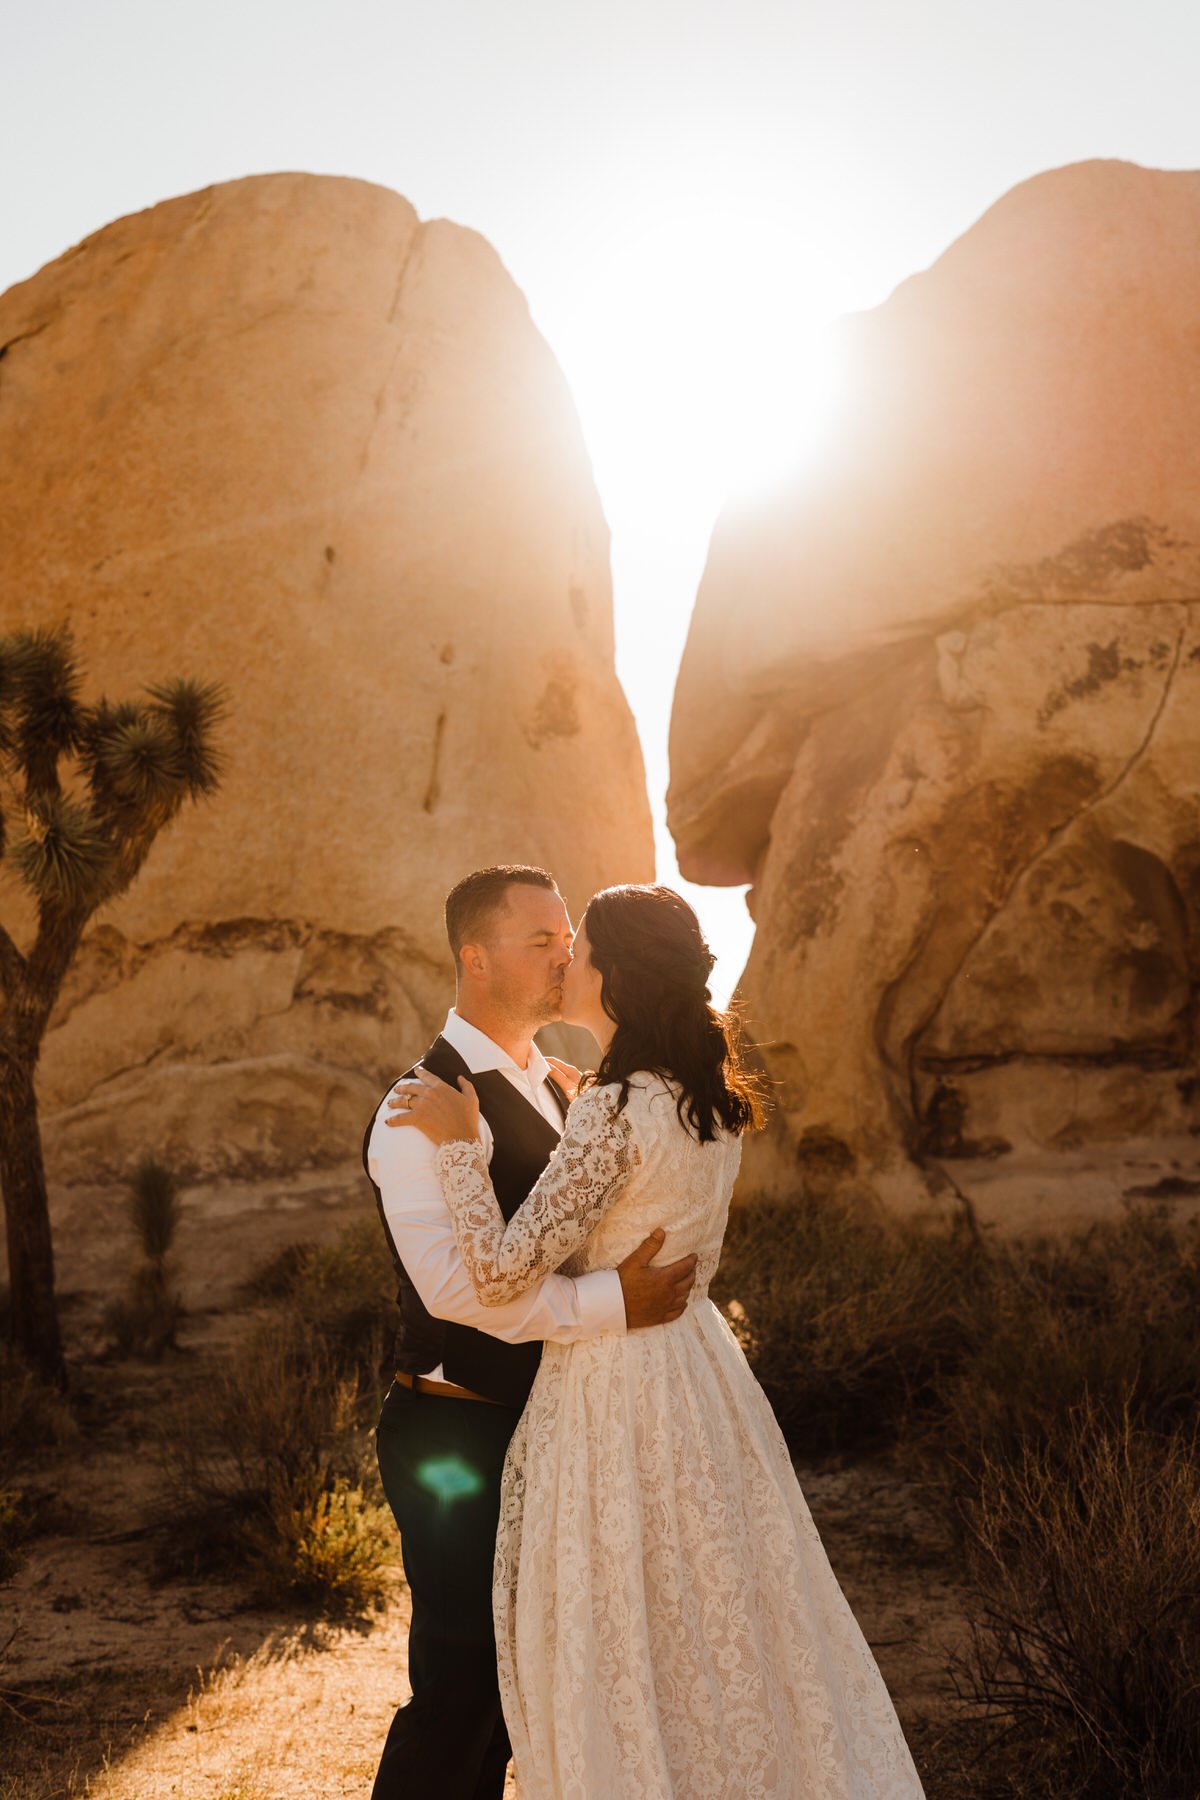 Bride-and-Groom-kiss-In-Front-of-Boulders-at-Joshua-Tree-Golden-Hour.jpg